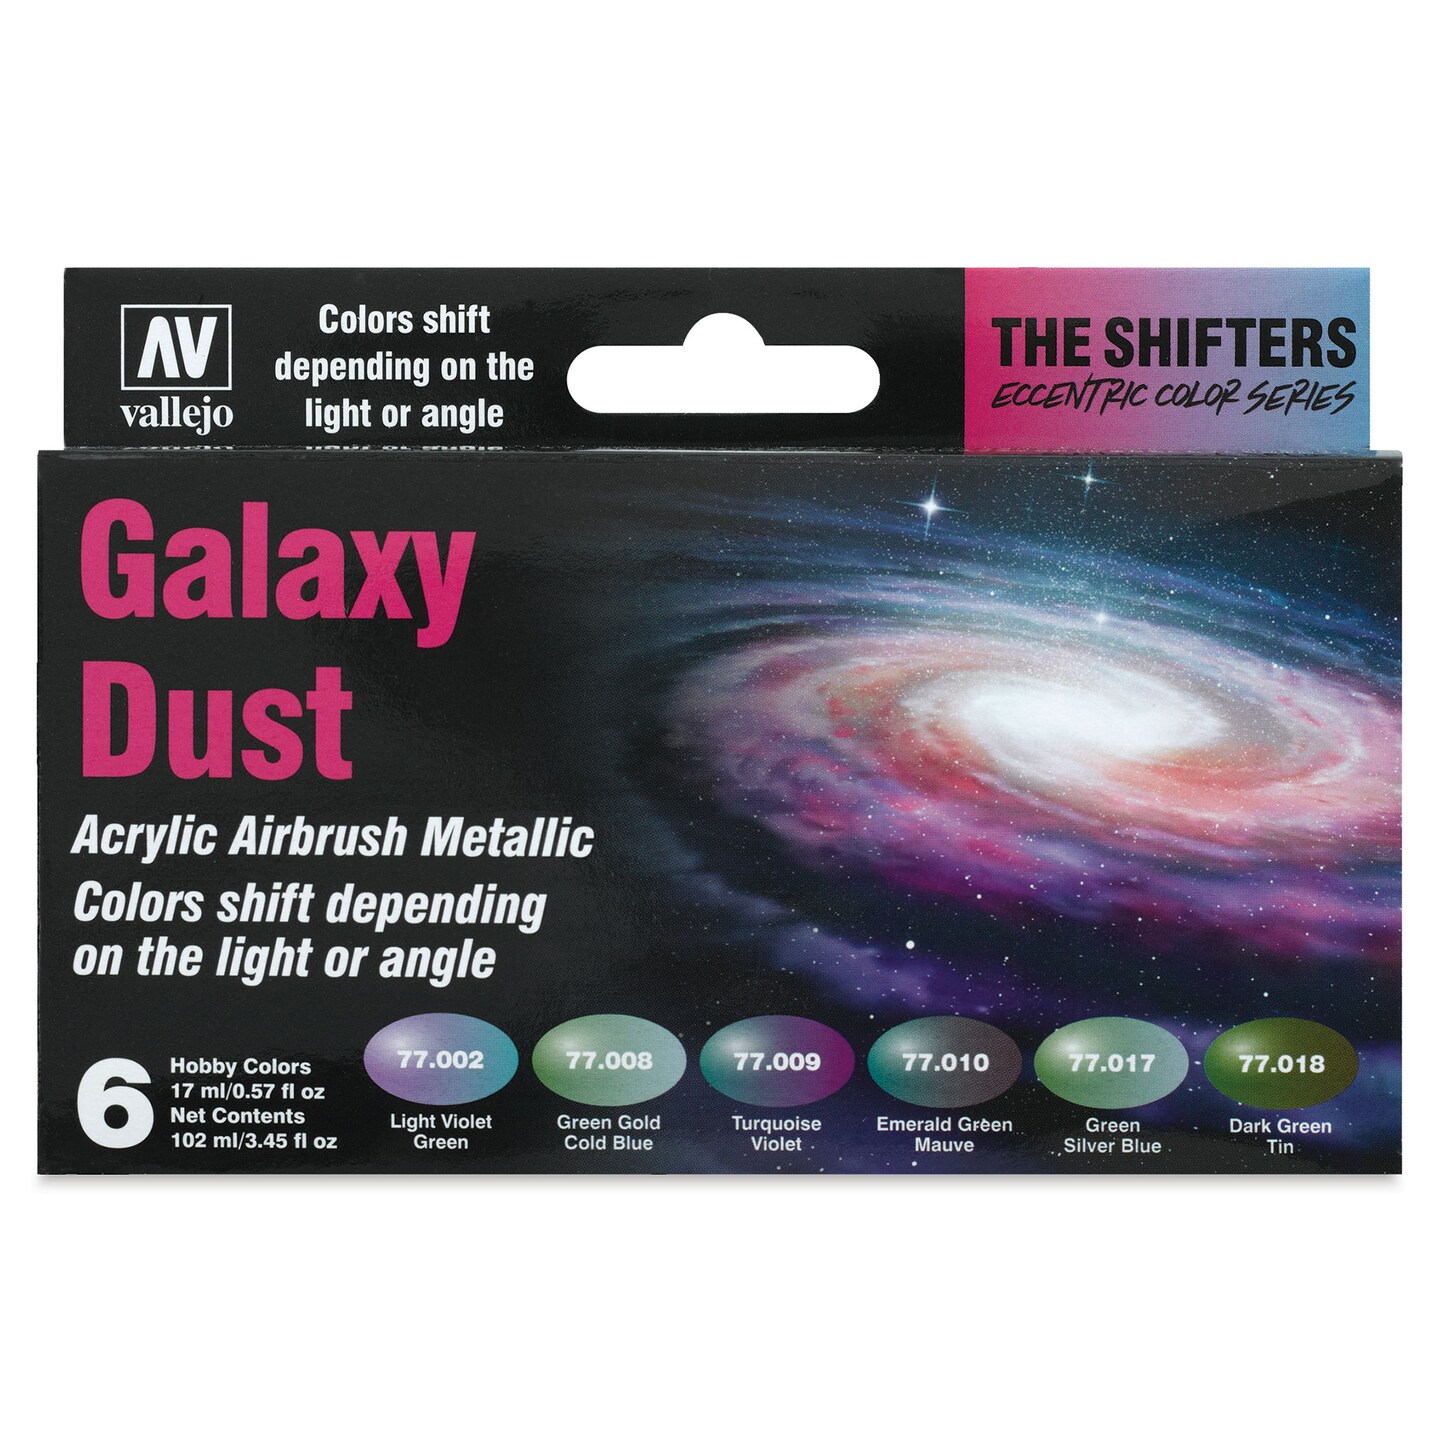 Vallejo The Shifters Eccentric Color Series Acrylic Airbrush Colors - 17 ml, Set of 6, Galaxy Dust